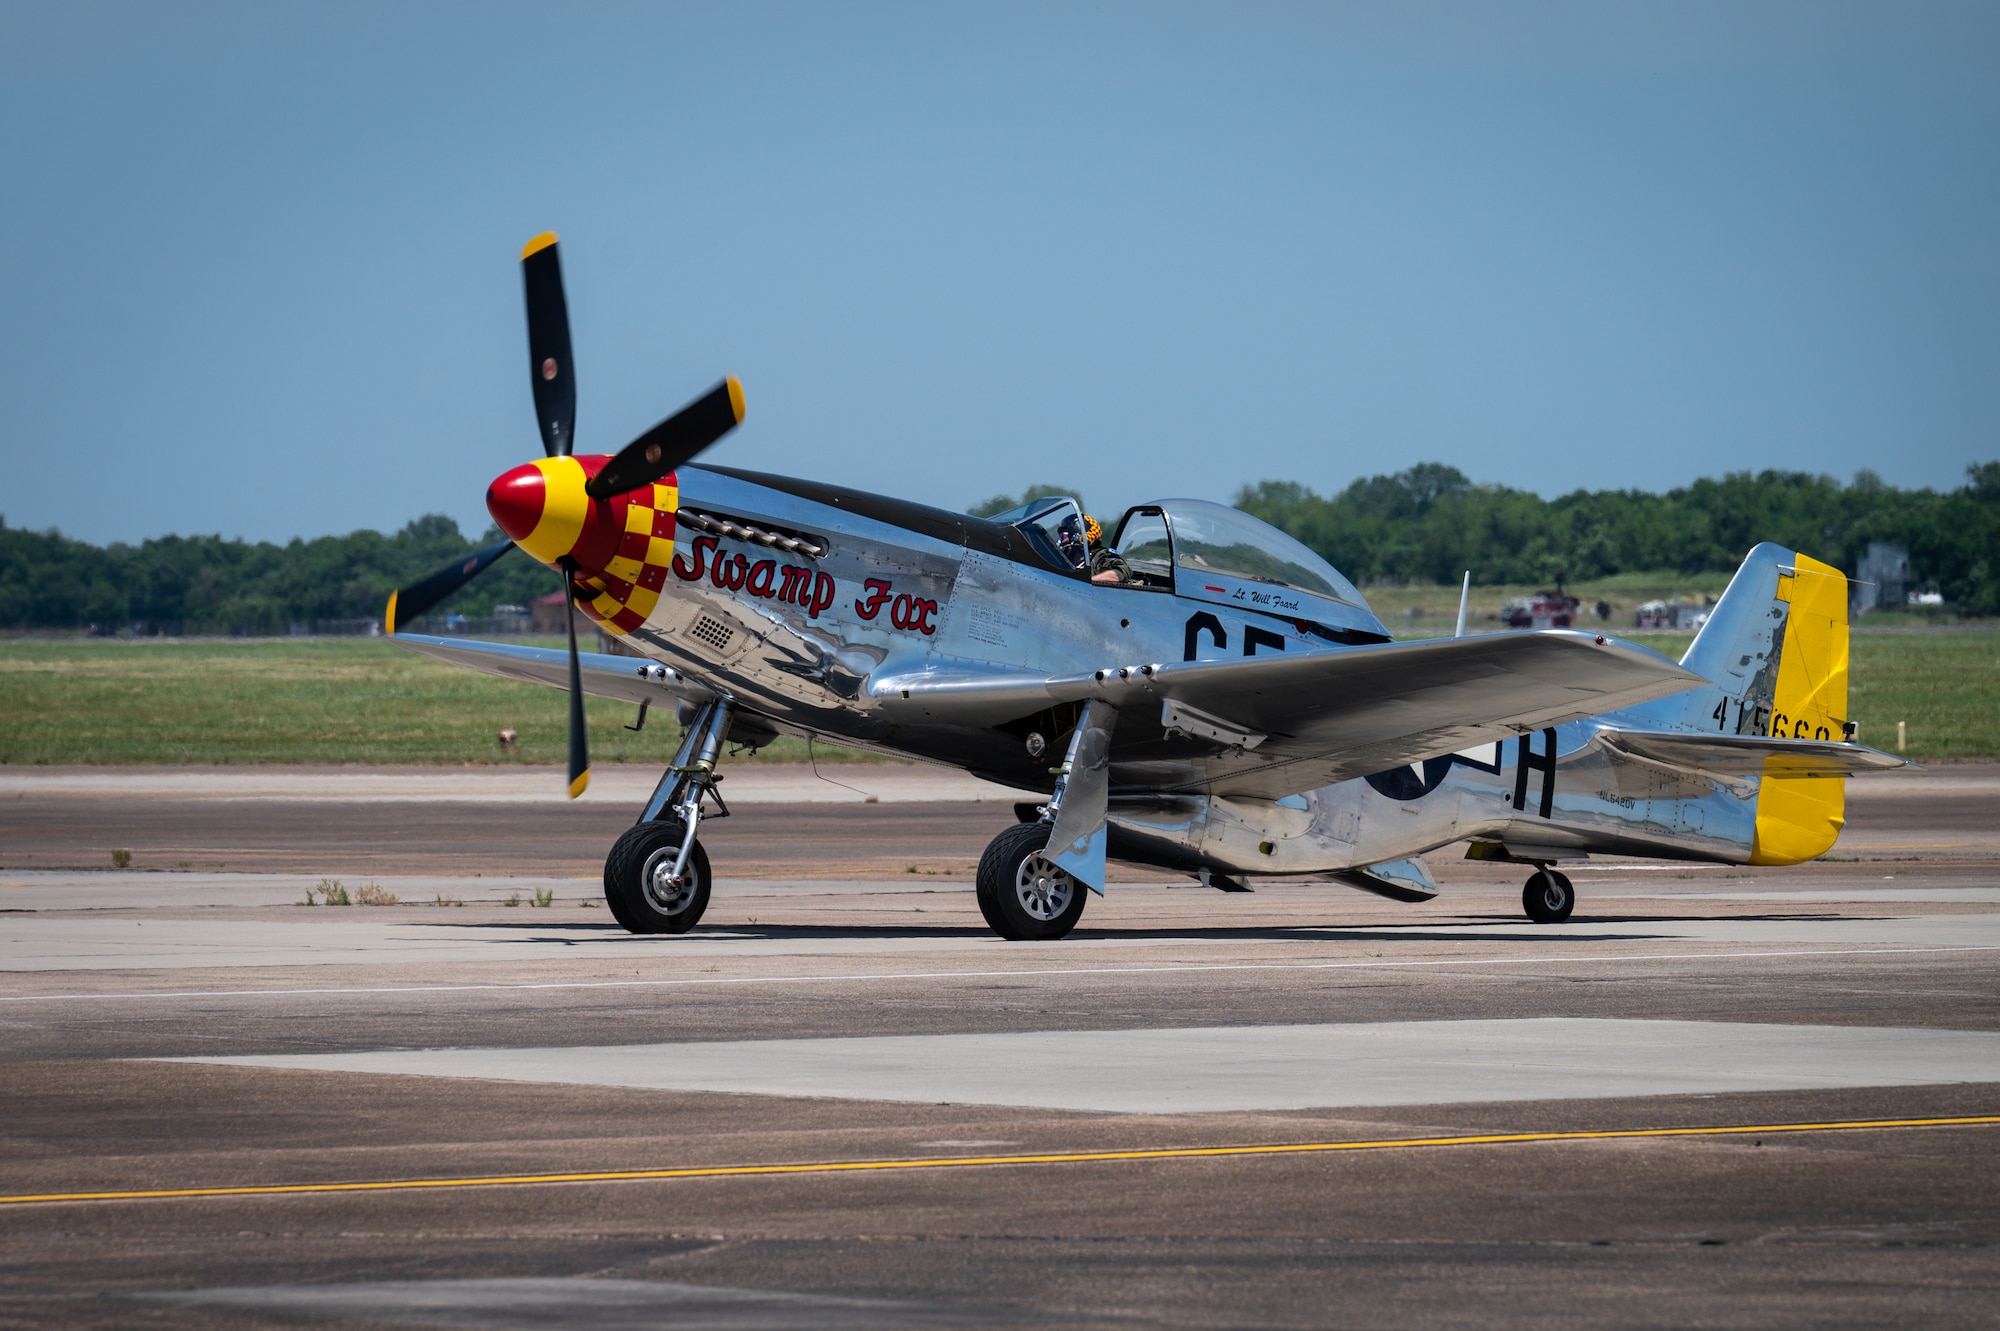 “Swamp Fox,” a P-51 Mustang that was once assigned to the Kentucky Air National Guard, lands after its performance at the Barksdale Defenders of Liberty Air & Space show at Barksdale Air Force Base, Louisiana, May 8, 2021. The Mustang was the primary airframe from its inception in 1947 until 1953. (U.S. Air Force photo by Airman 1st Class Chase Sullivan)